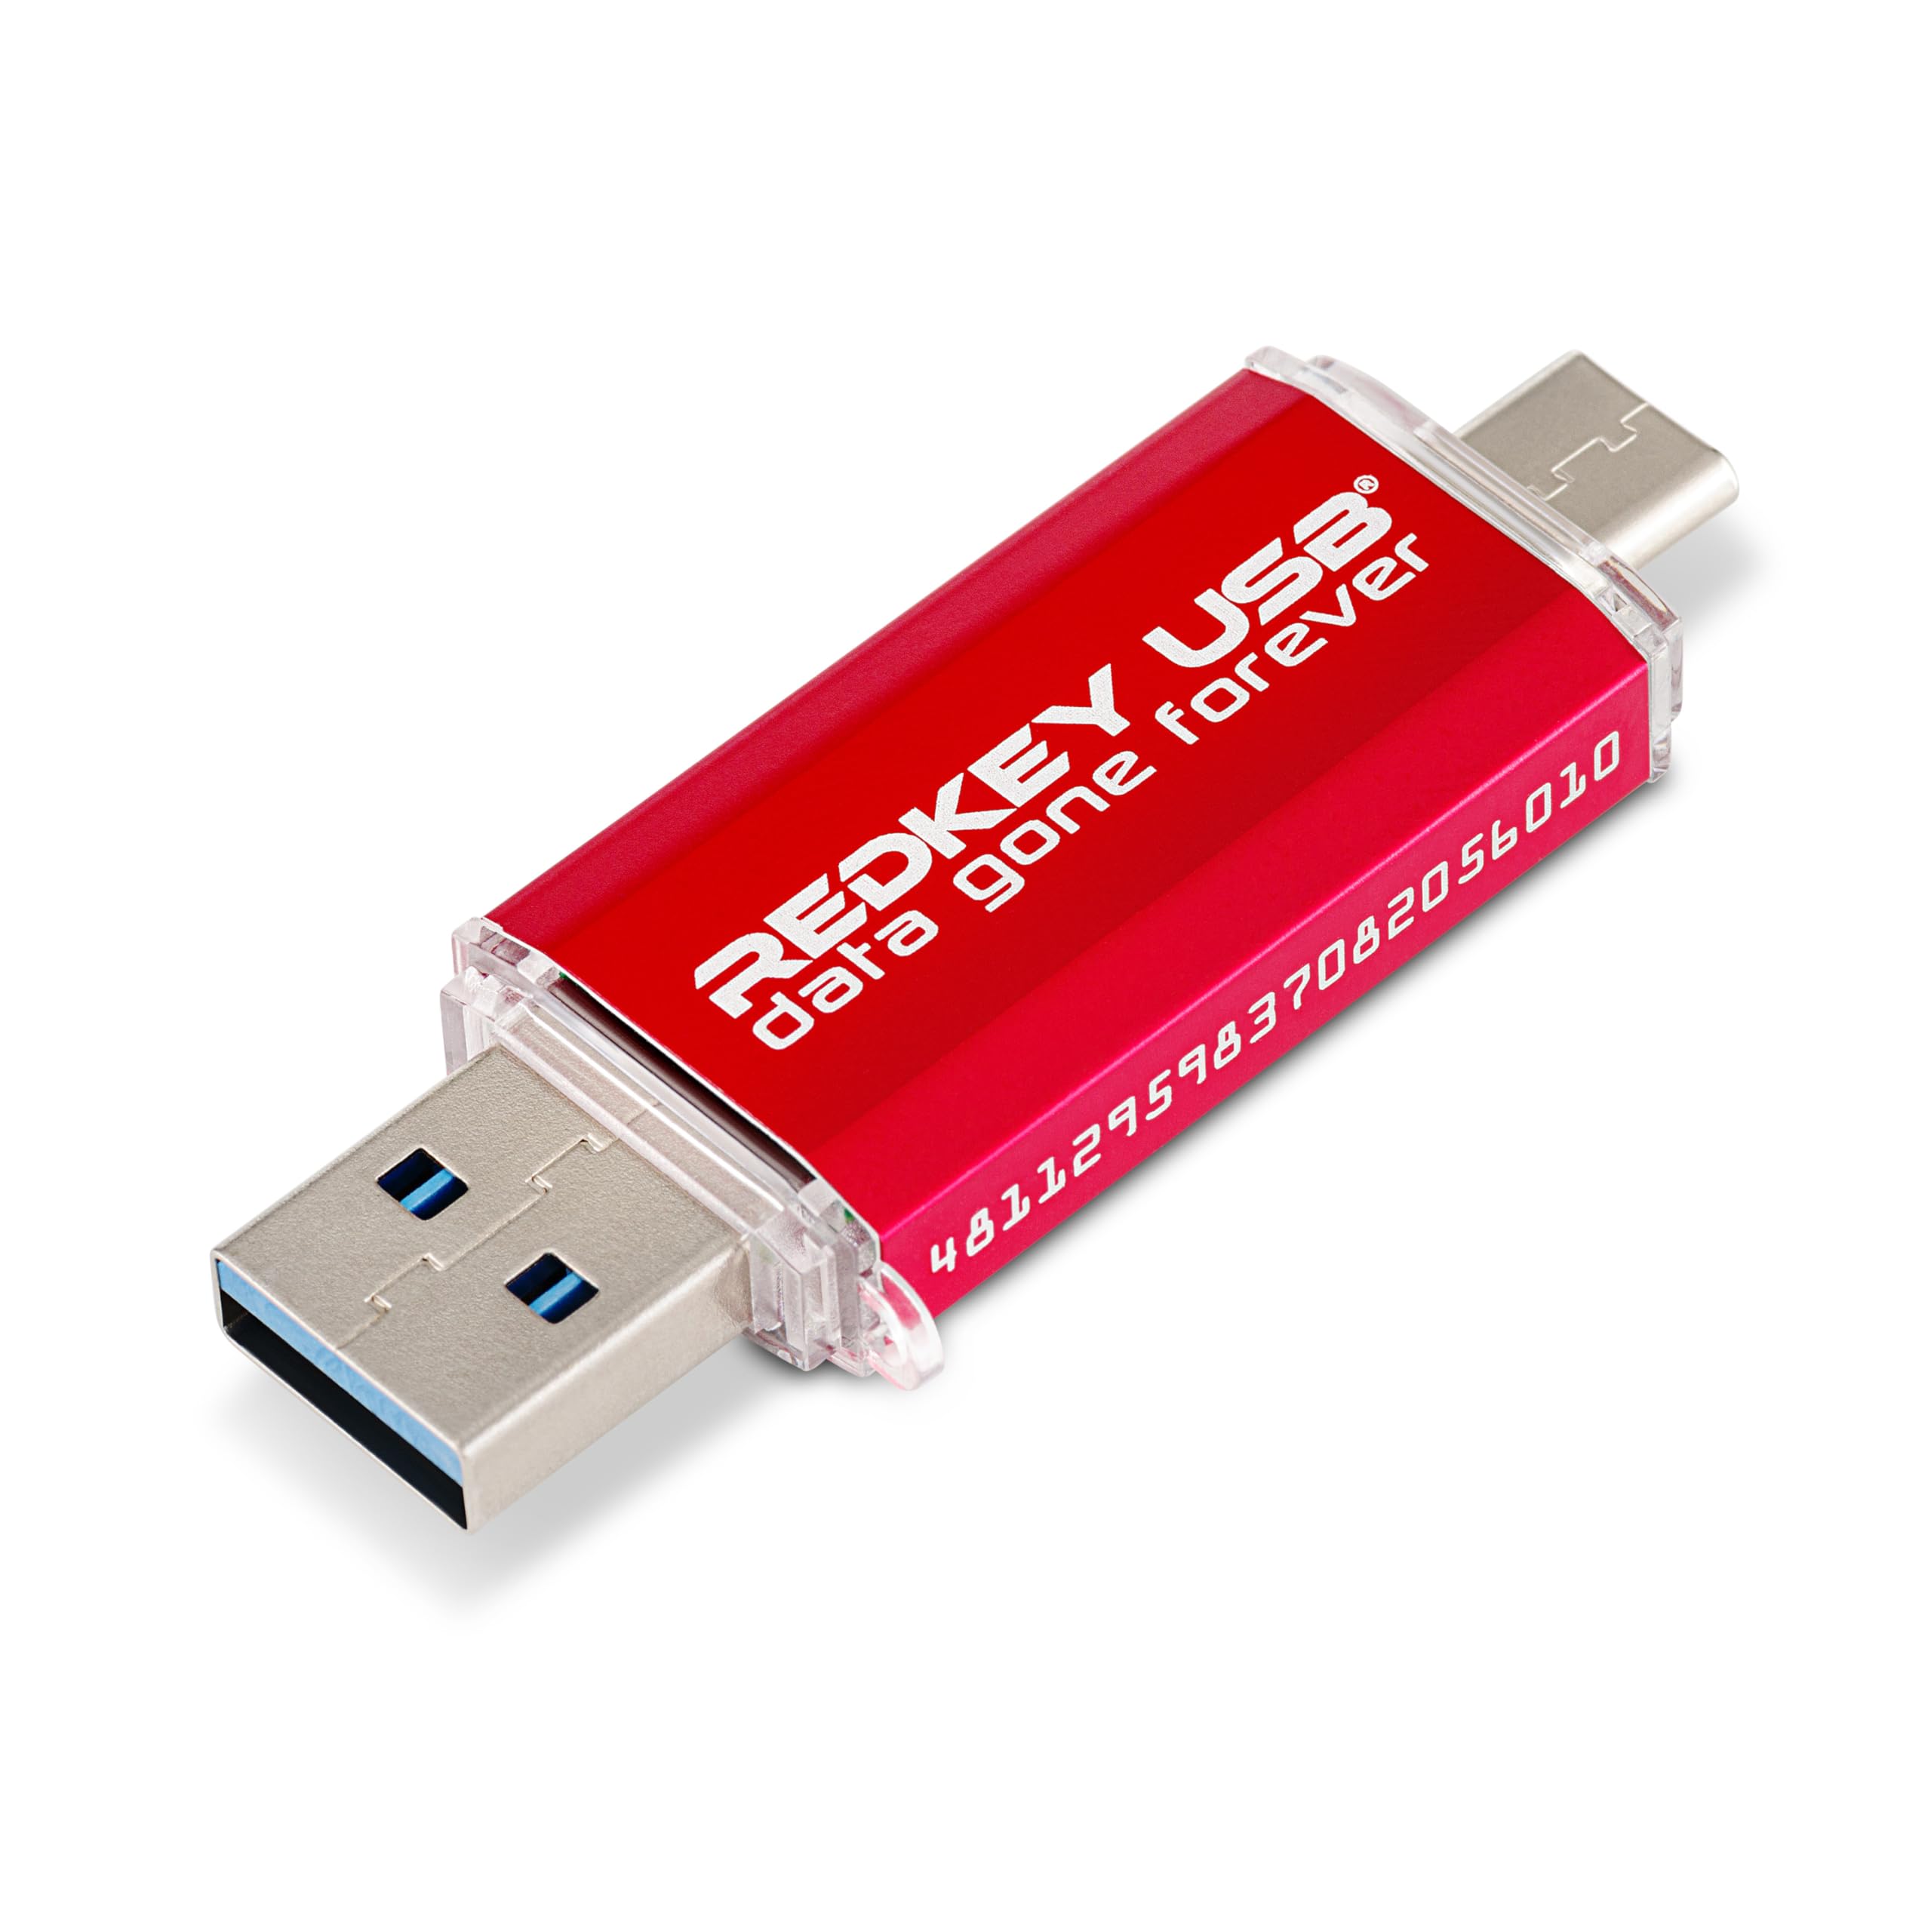 Redkey USB Home: Certified Data Wipe Tool for PCs. Easy-to-Use! Unlimited use & Updates, for Desktop Laptop PC, Mac, SSD, HDD Etc. (Home Edition)